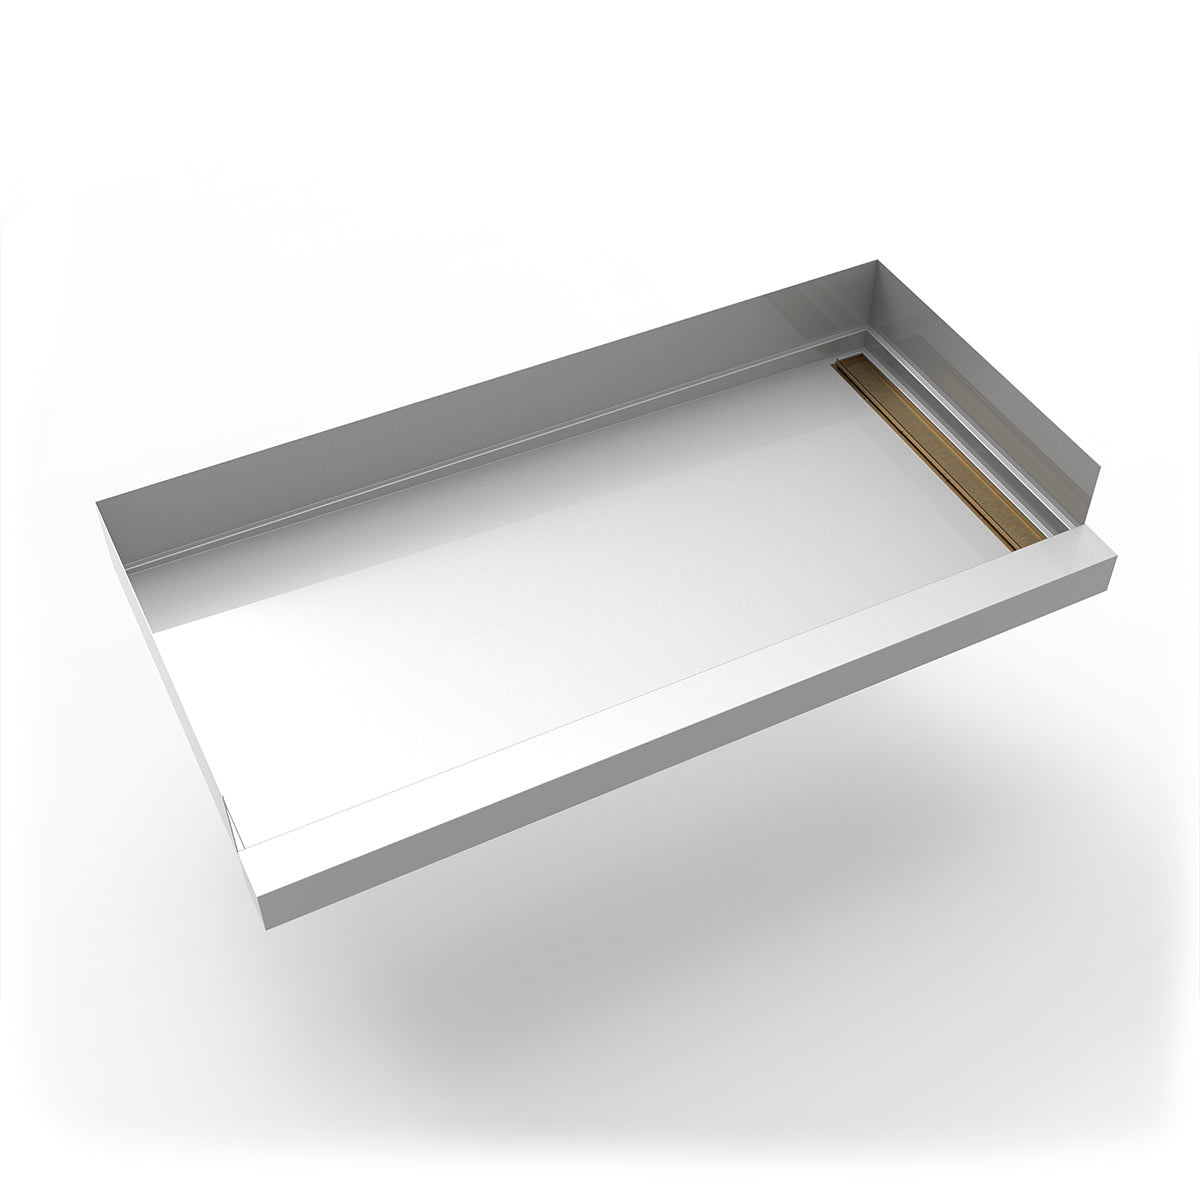 Infinity Drain 30"x 60" Stainless Steel Shower Base with Right Wall Tile Insert Linear Drain location